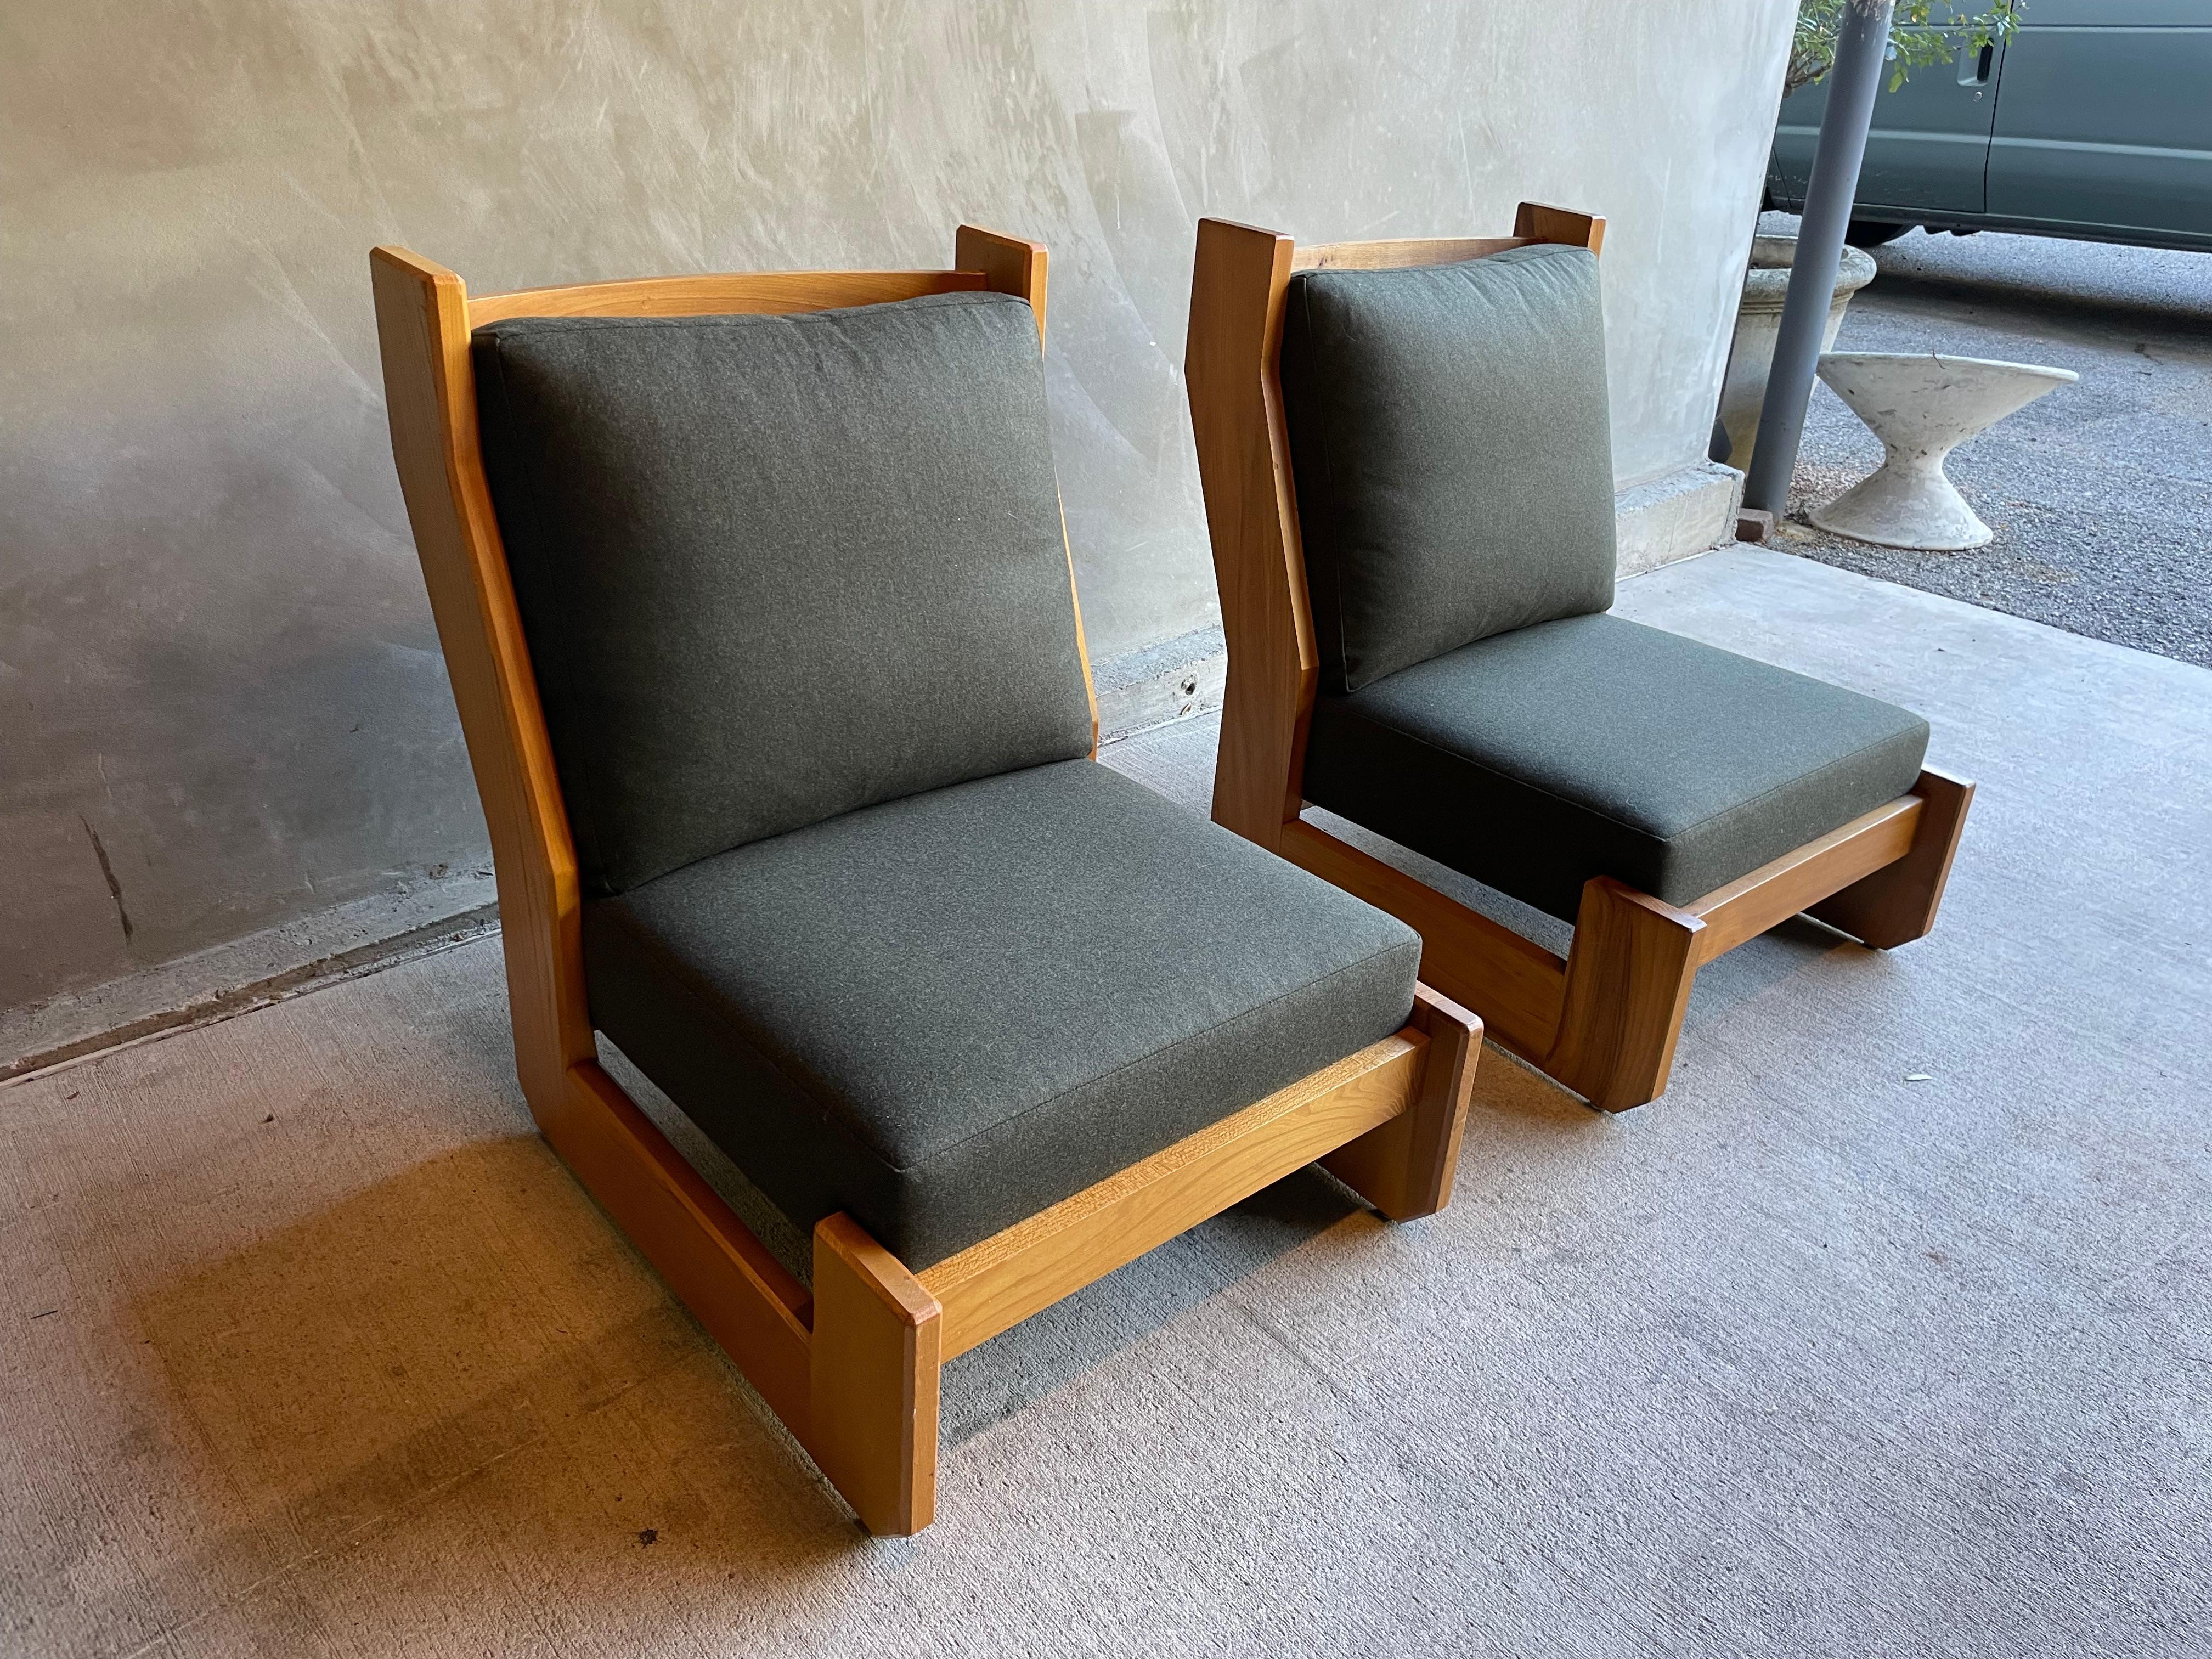 Pair of Lounge Chairs, Maison Regain, France, 1980's For Sale 2